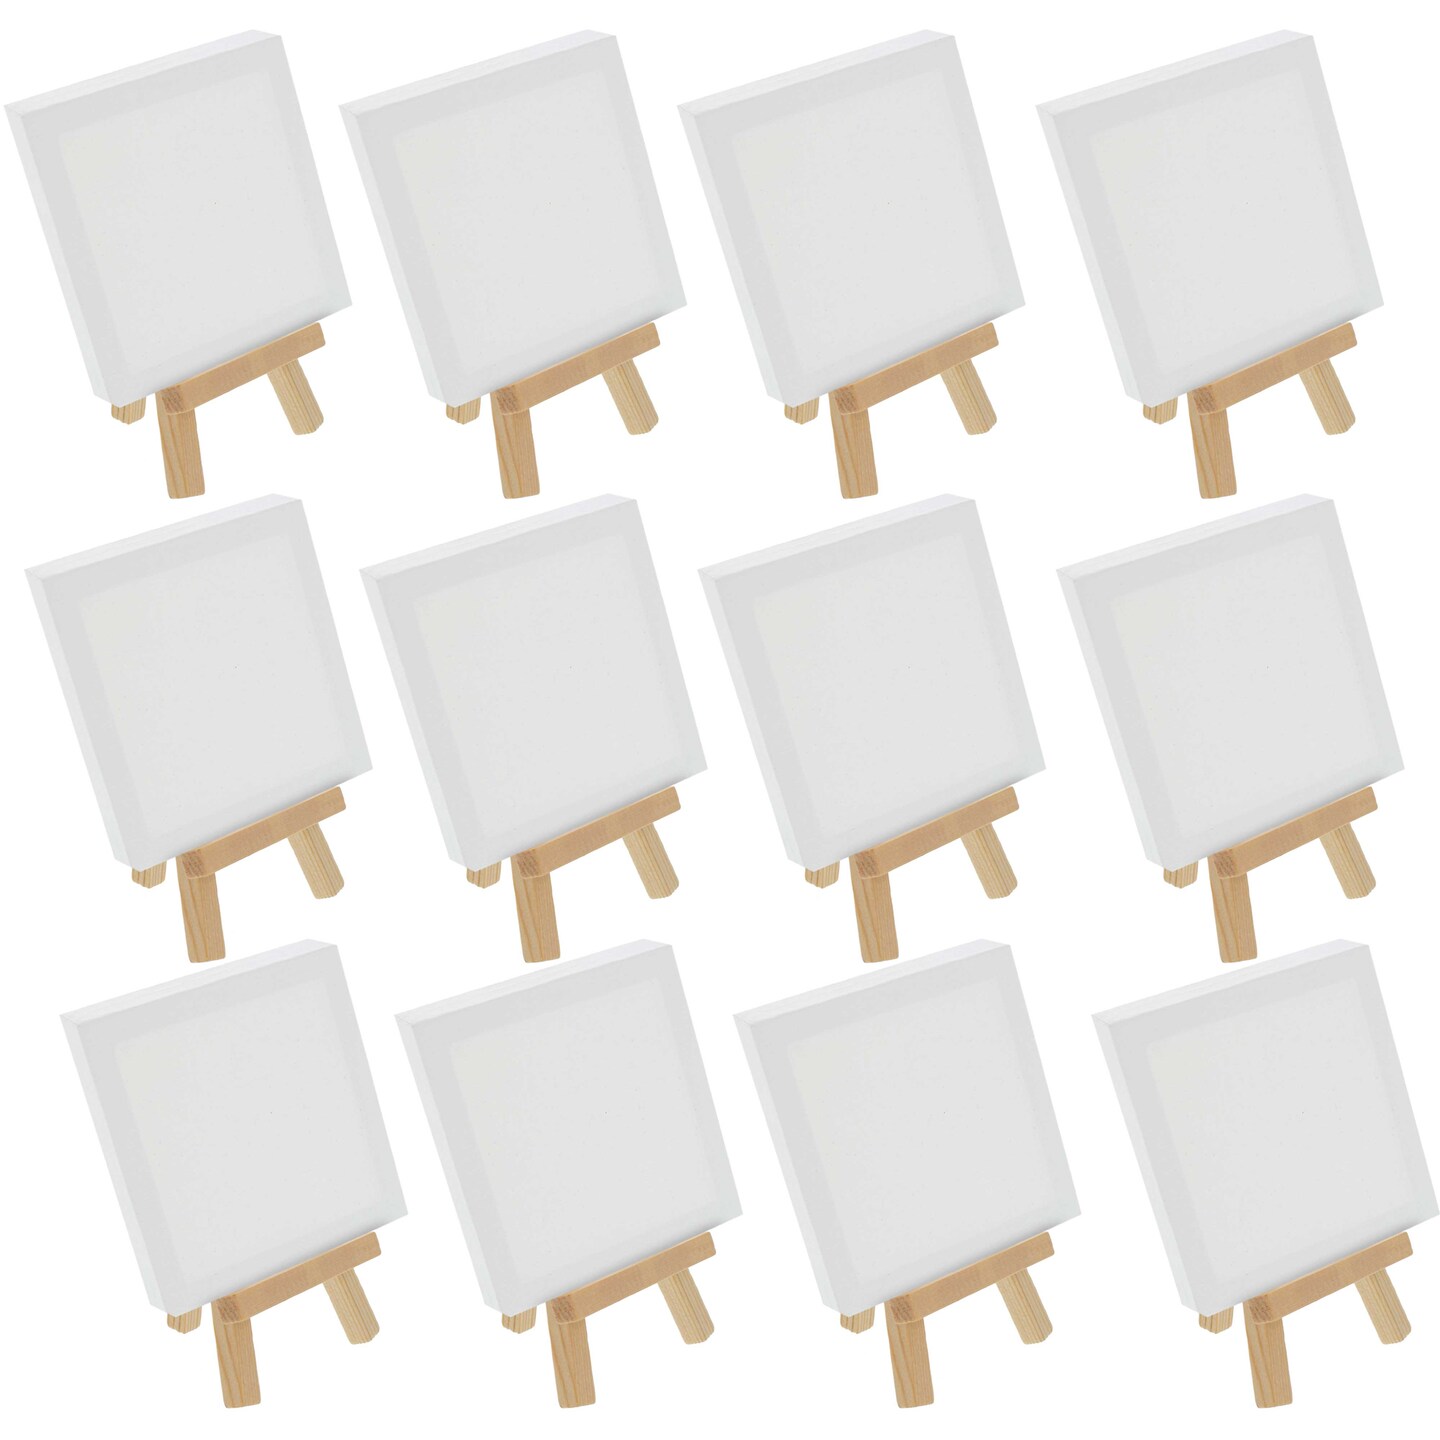 5&#x22; x 5&#x22; Stretched Canvas with 8&#x22; Mini Natural Wood Display Easel Kit (Pack of 12), Artist Tripod Tabletop Holder Stand - Painting Party, Oil Acrylic